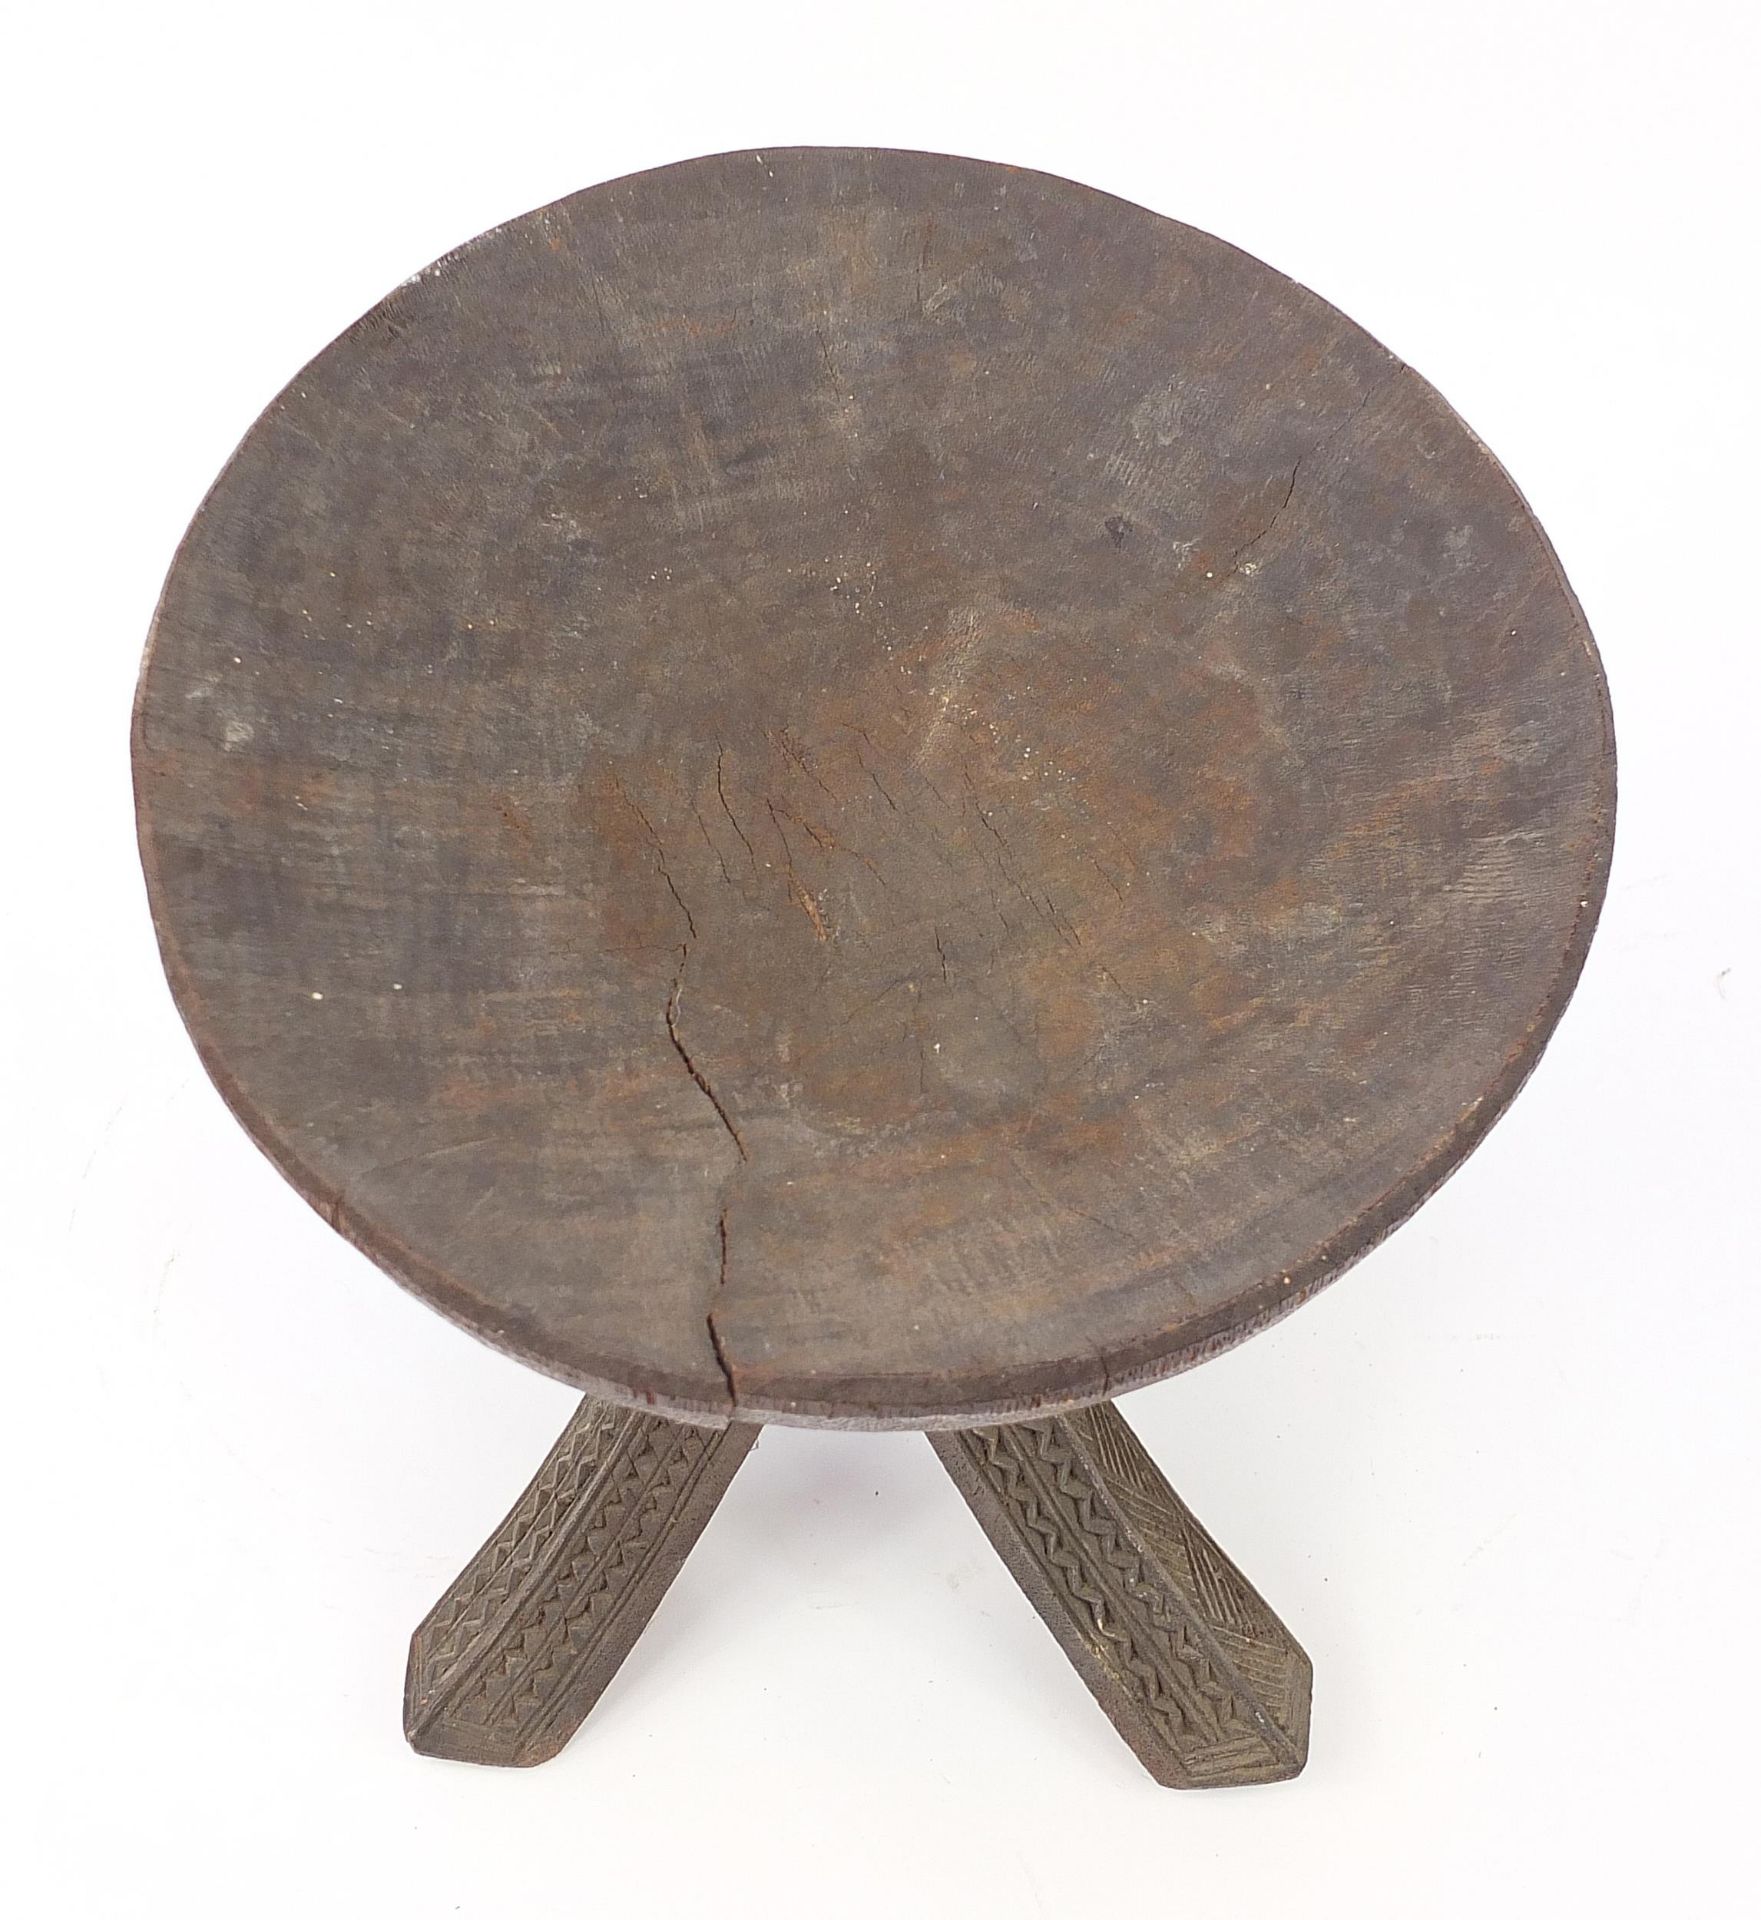 African tribal interest carved stool, 34cm high x 31cm in diameter - Image 2 of 4